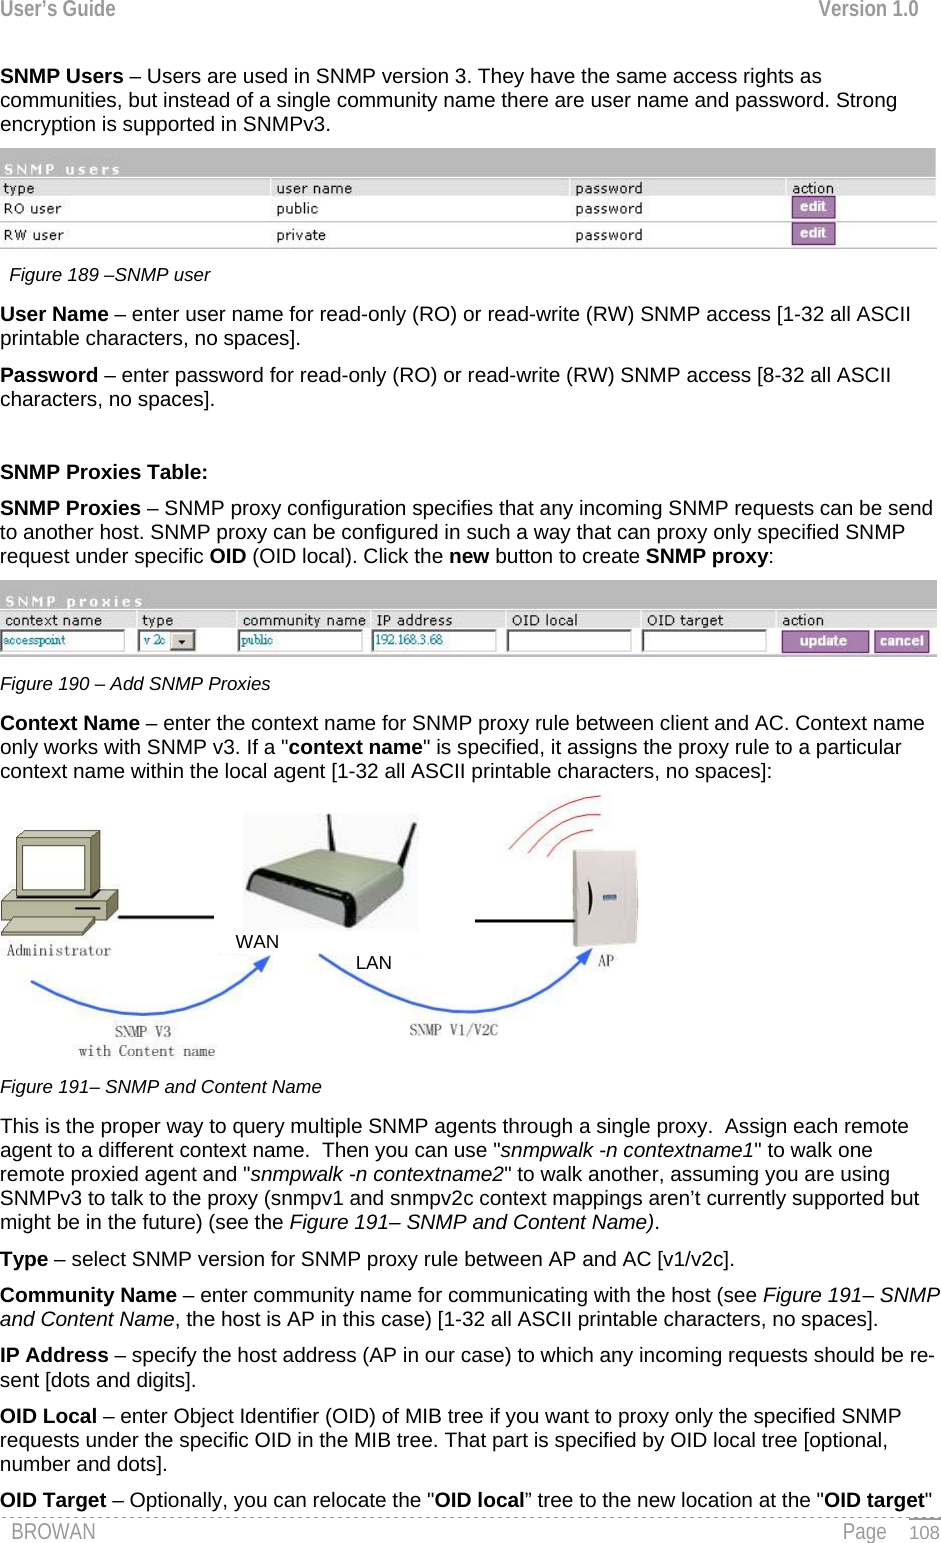 User’s Guide  Version 1.0  SNMP Users – Users are used in SNMP version 3. They have the same access rights as communities, but instead of a single community name there are user name and password. Strong encryption is supported in SNMPv3.  Figure 189 –SNMP user User Name – enter user name for read-only (RO) or read-write (RW) SNMP access [1-32 all ASCII printable characters, no spaces]. Password – enter password for read-only (RO) or read-write (RW) SNMP access [8-32 all ASCII characters, no spaces].  SNMP Proxies Table: SNMP Proxies – SNMP proxy configuration specifies that any incoming SNMP requests can be send to another host. SNMP proxy can be configured in such a way that can proxy only specified SNMP request under specific OID (OID local). Click the new button to create SNMP proxy:  Figure 190 – Add SNMP Proxies Context Name – enter the context name for SNMP proxy rule between client and AC. Context name only works with SNMP v3. If a &quot;context name&quot; is specified, it assigns the proxy rule to a particular context name within the local agent [1-32 all ASCII printable characters, no spaces]:  LANWAN Figure 191– SNMP and Content Name This is the proper way to query multiple SNMP agents through a single proxy.  Assign each remote agent to a different context name.  Then you can use &quot;snmpwalk -n contextname1&quot; to walk one remote proxied agent and &quot;snmpwalk -n contextname2&quot; to walk another, assuming you are using SNMPv3 to talk to the proxy (snmpv1 and snmpv2c context mappings aren’t currently supported but might be in the future) (see the Figure 191– SNMP and Content Name). Type – select SNMP version for SNMP proxy rule between AP and AC [v1/v2c]. Community Name – enter community name for communicating with the host (see Figure 191– SNMP and Content Name, the host is AP in this case) [1-32 all ASCII printable characters, no spaces]. IP Address – specify the host address (AP in our case) to which any incoming requests should be re-sent [dots and digits]. OID Local – enter Object Identifier (OID) of MIB tree if you want to proxy only the specified SNMP requests under the specific OID in the MIB tree. That part is specified by OID local tree [optional, number and dots]. BROWAN                                                                                                                                               Page OID Target – Optionally, you can relocate the &quot;OID local” tree to the new location at the &quot;OID target&quot;   108